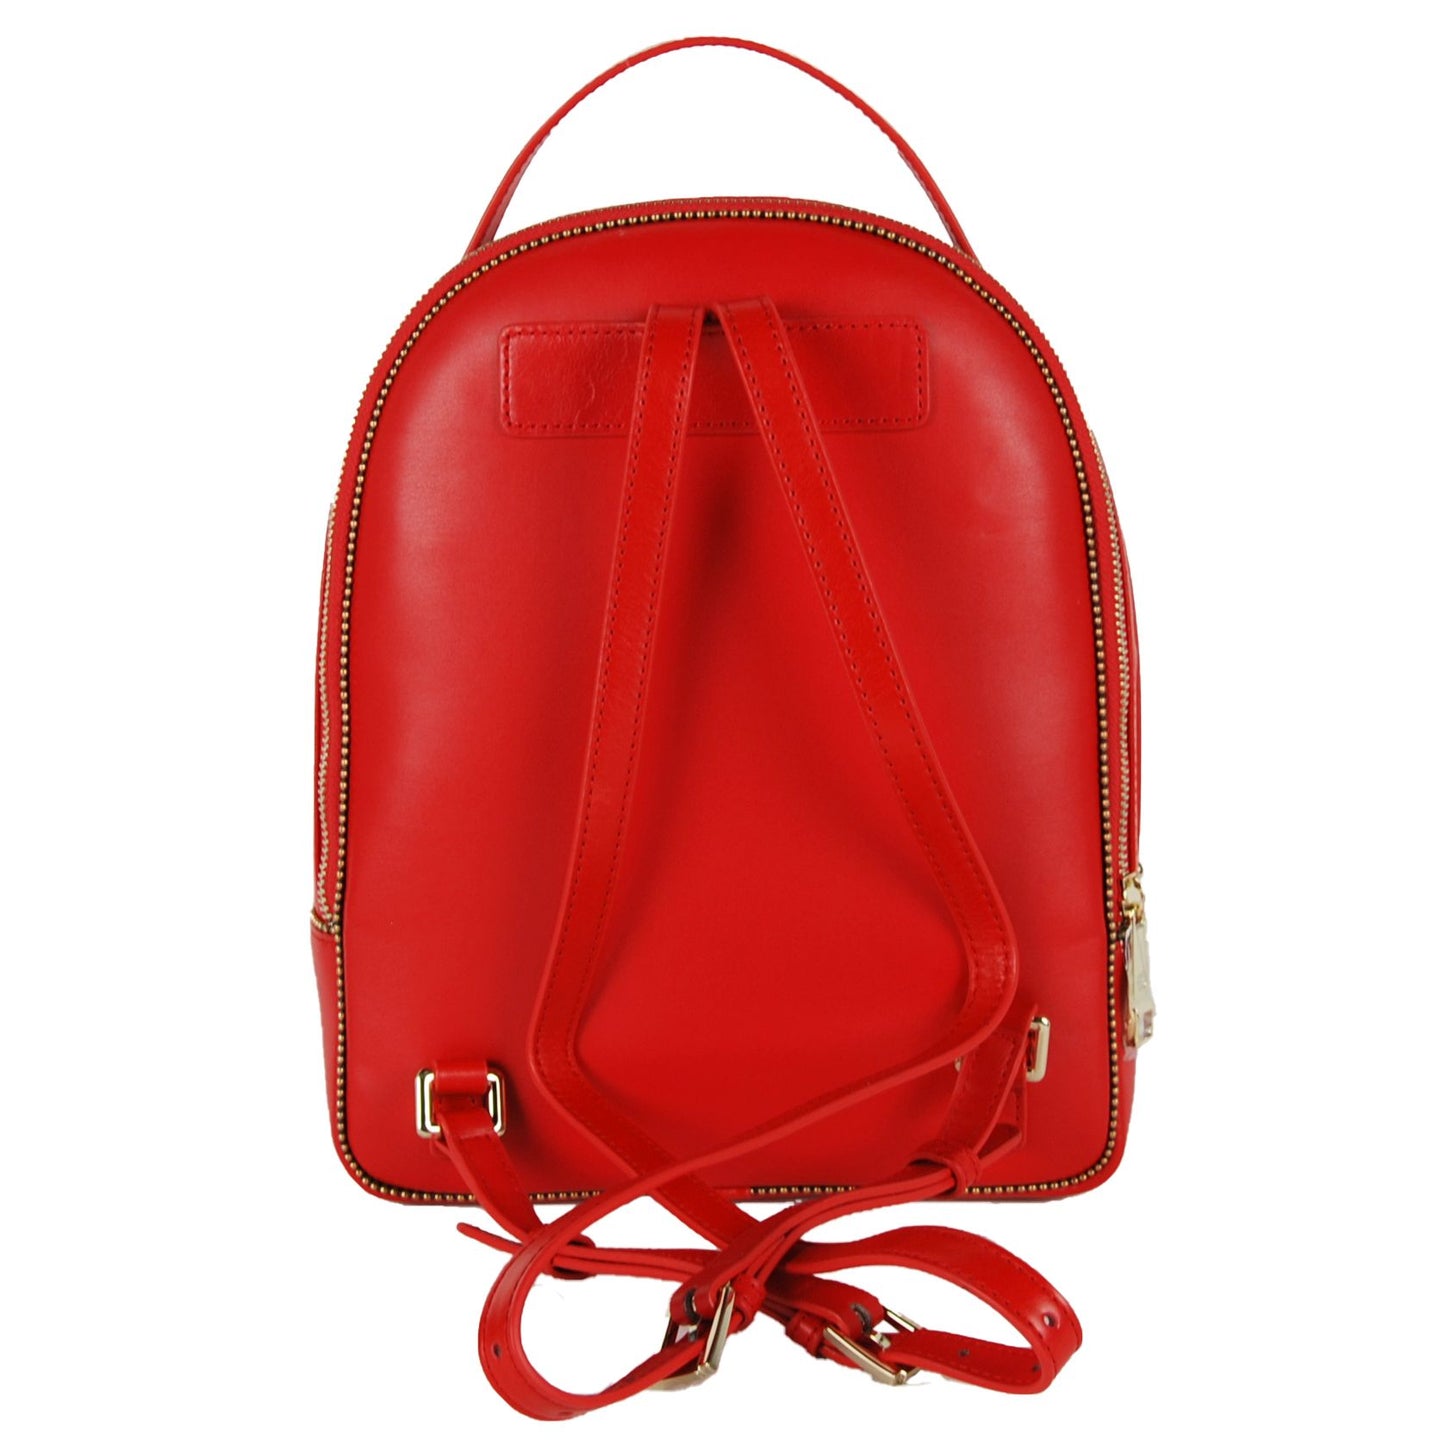 Chic Red Backpack for Trendsetters